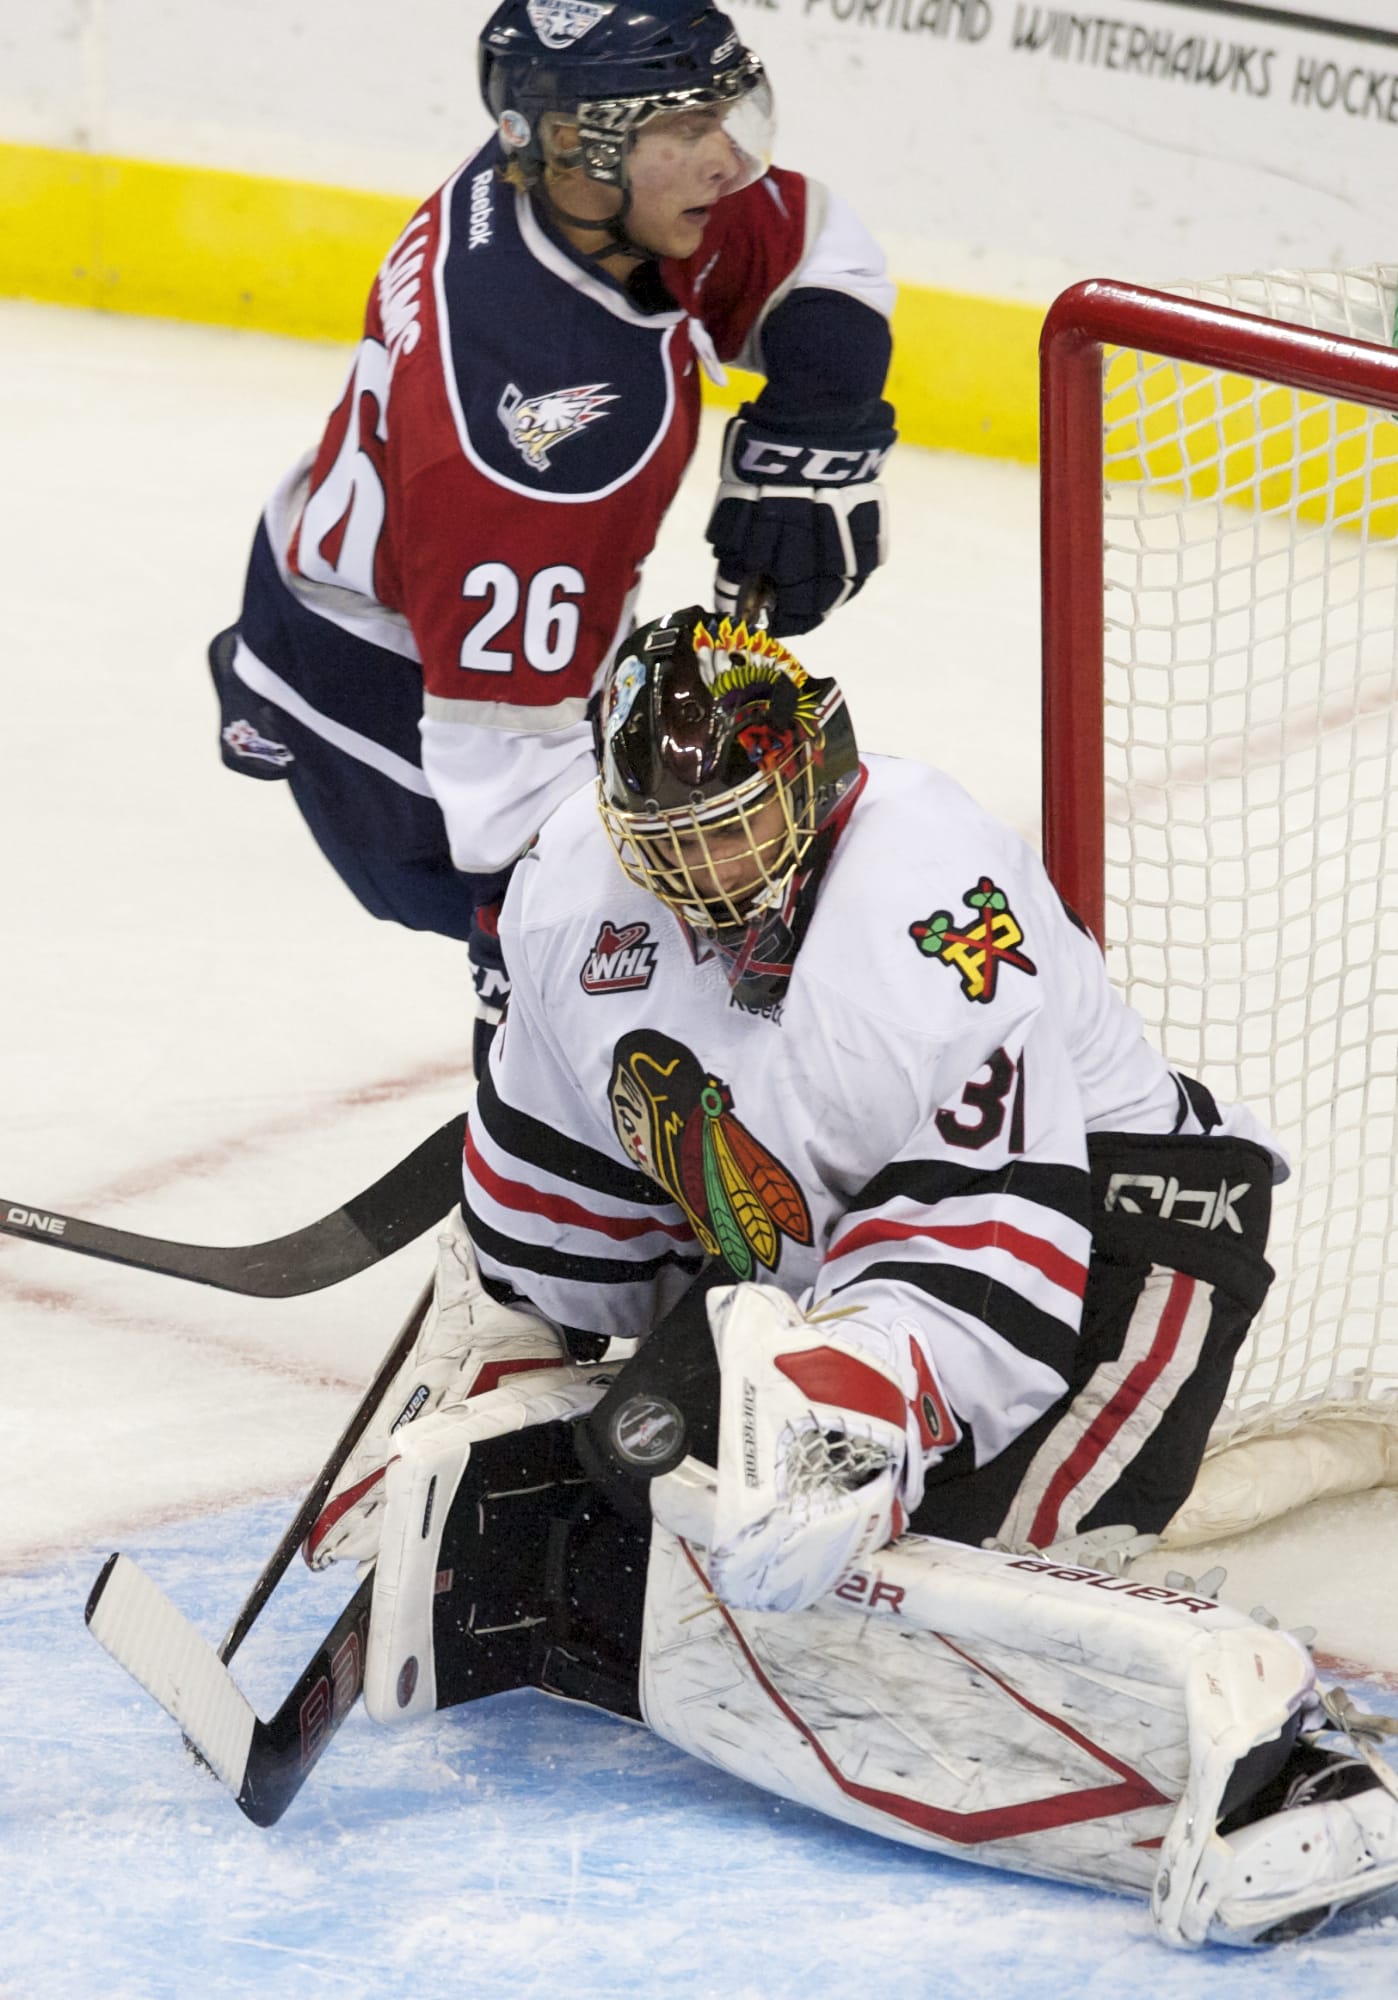 Steven Lane/The Columbian
Portland Winterhawks goaltender Mac Carruth has stopped 92 percent of the shots he has seen in these playoffs, the 19-year-old's third as the team's top netminder.